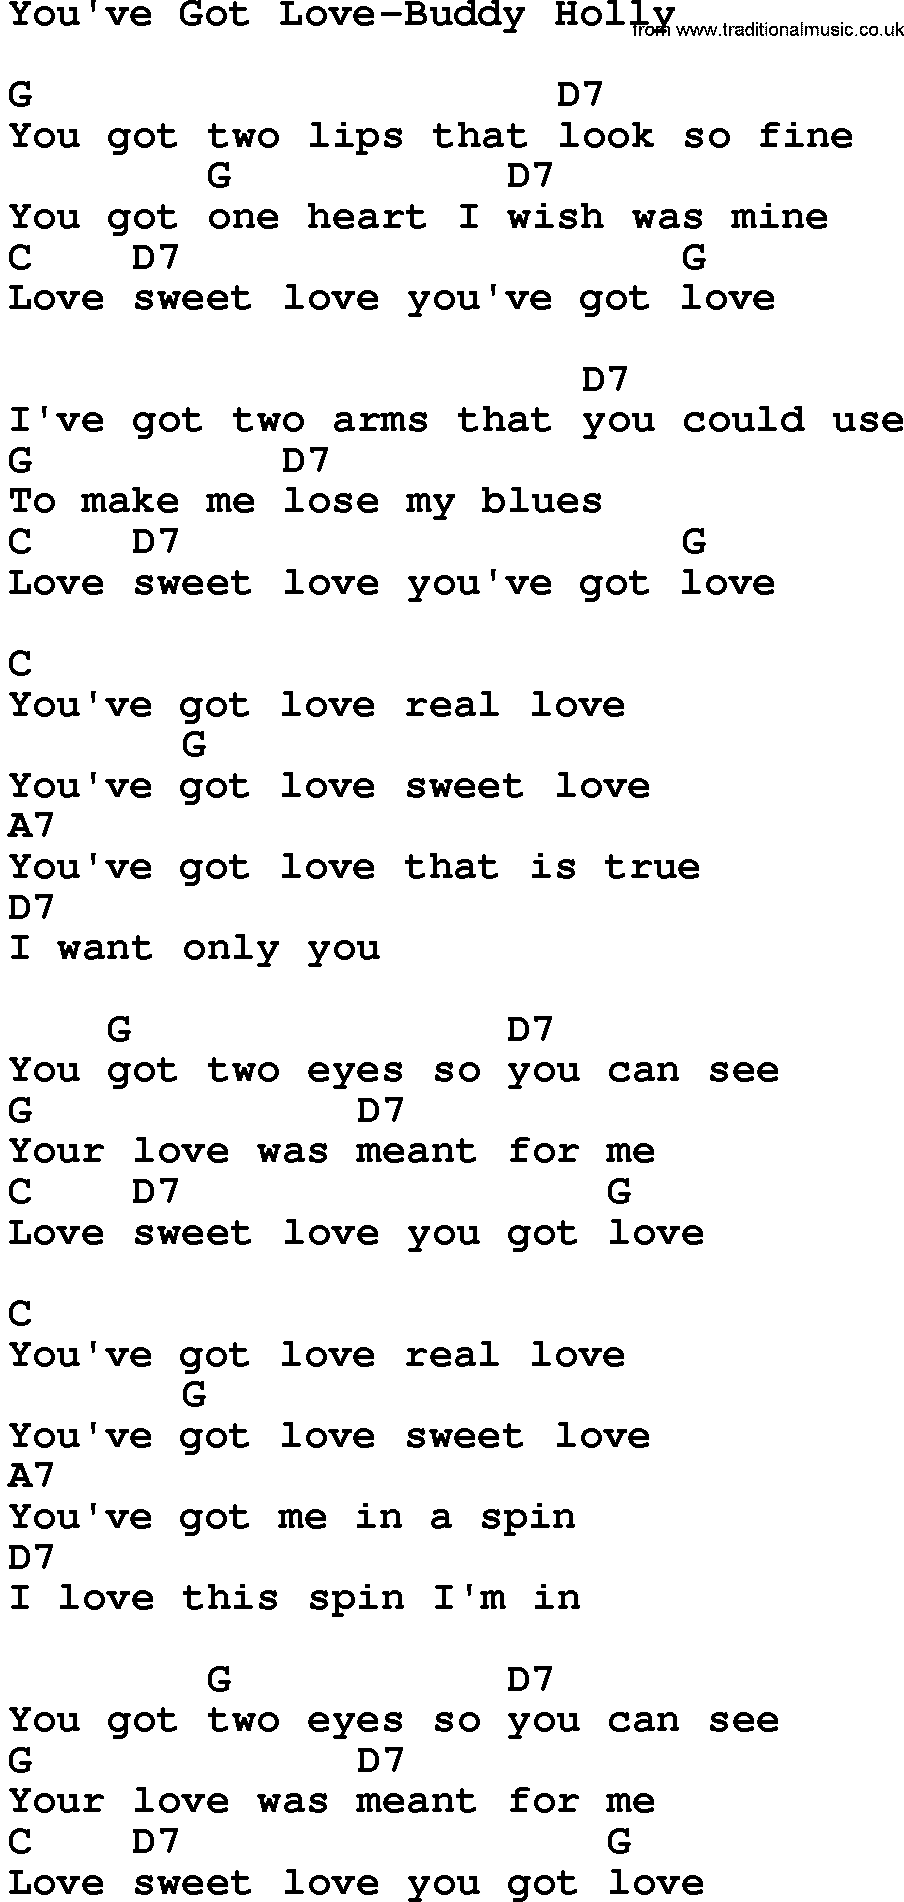 Country music song: You've Got Love-Buddy Holly lyrics and chords